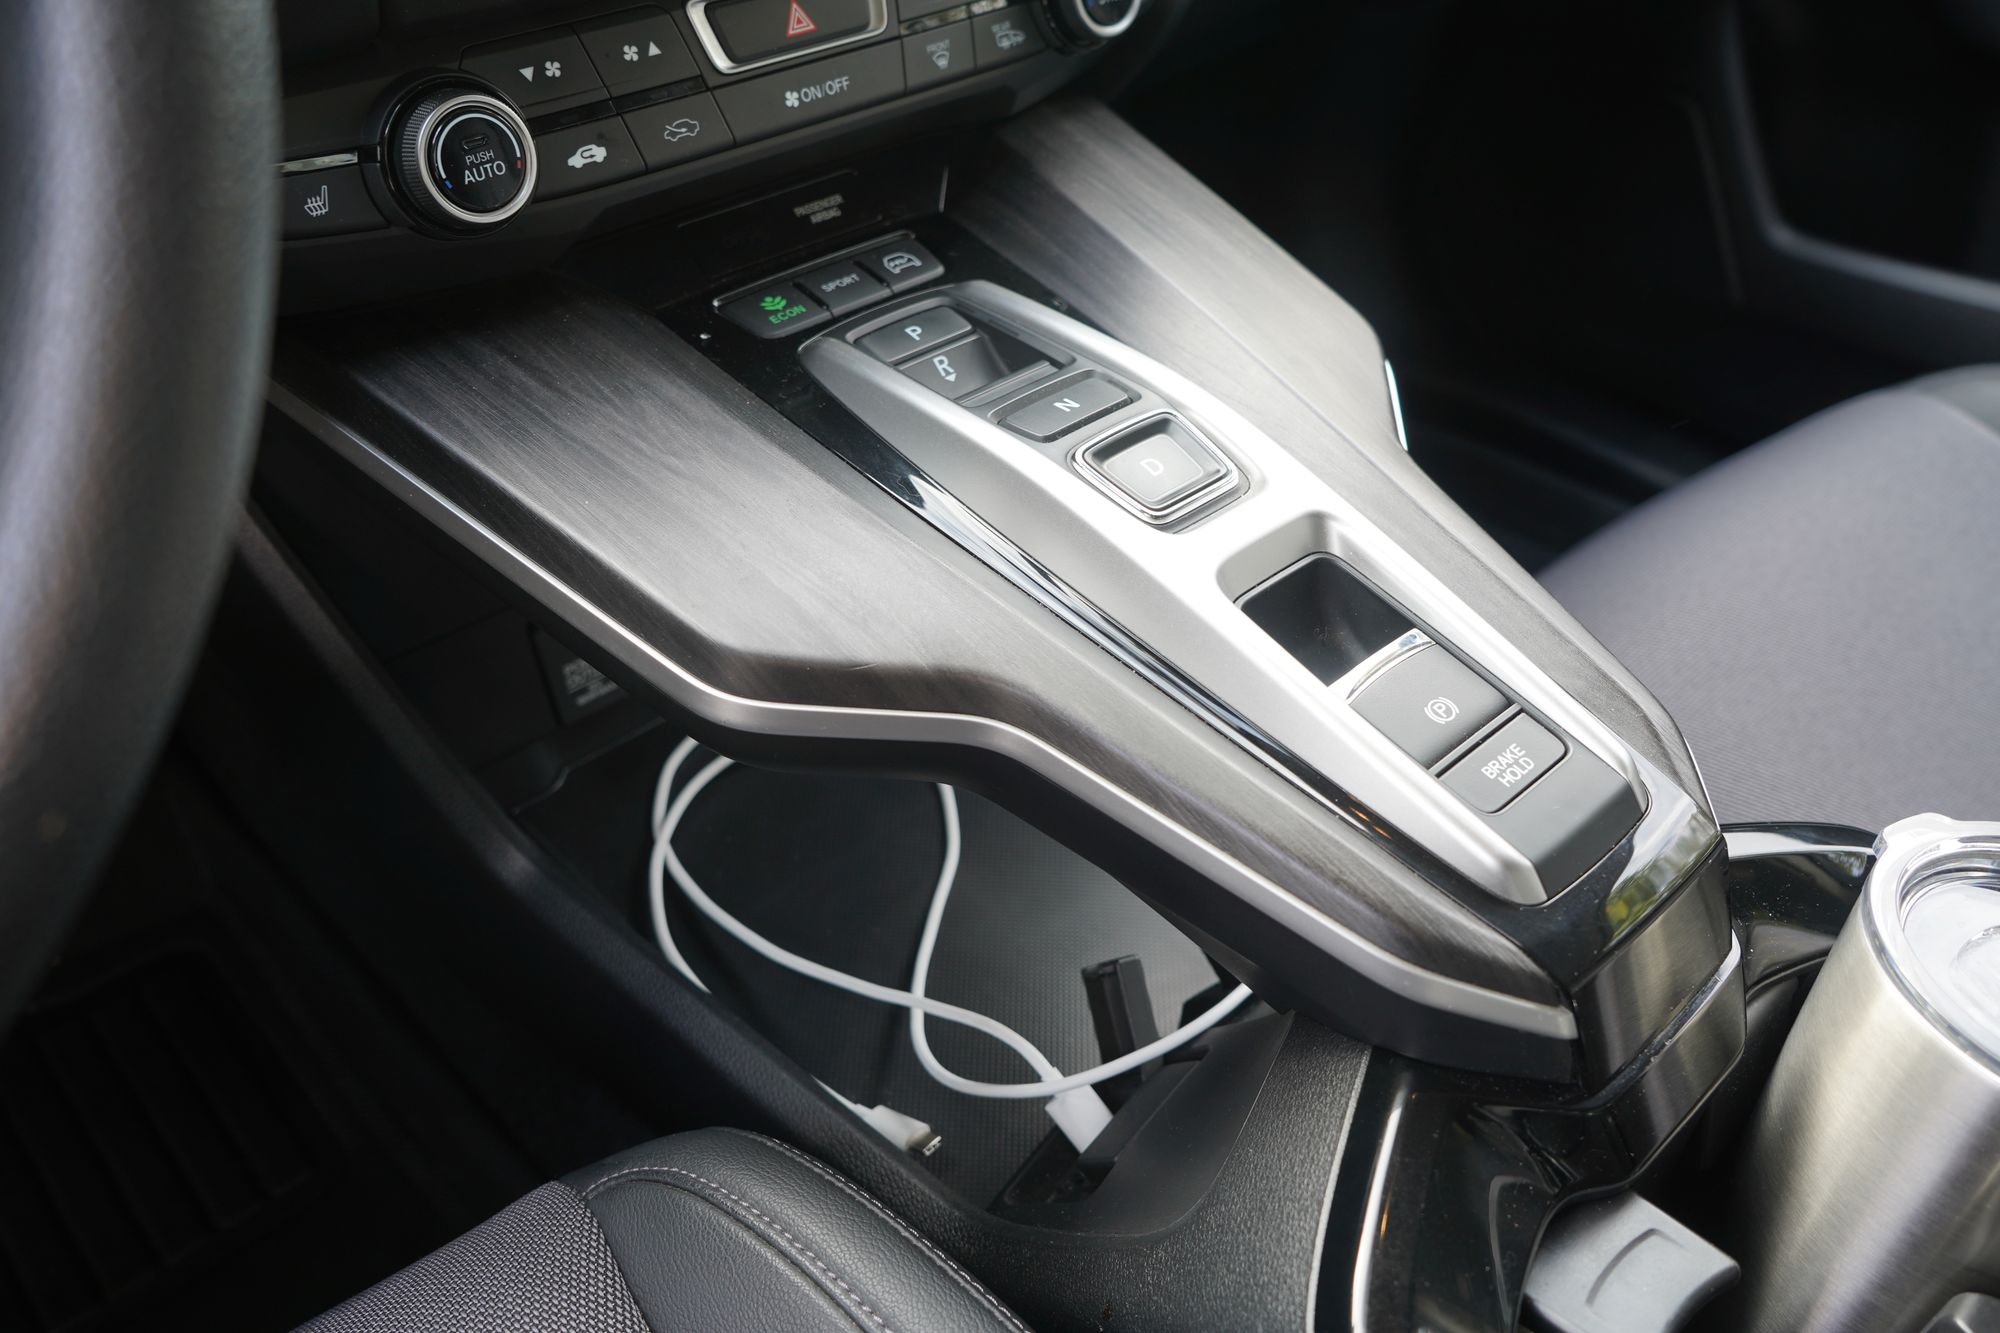 Shelf and shifter arrangement in the center console